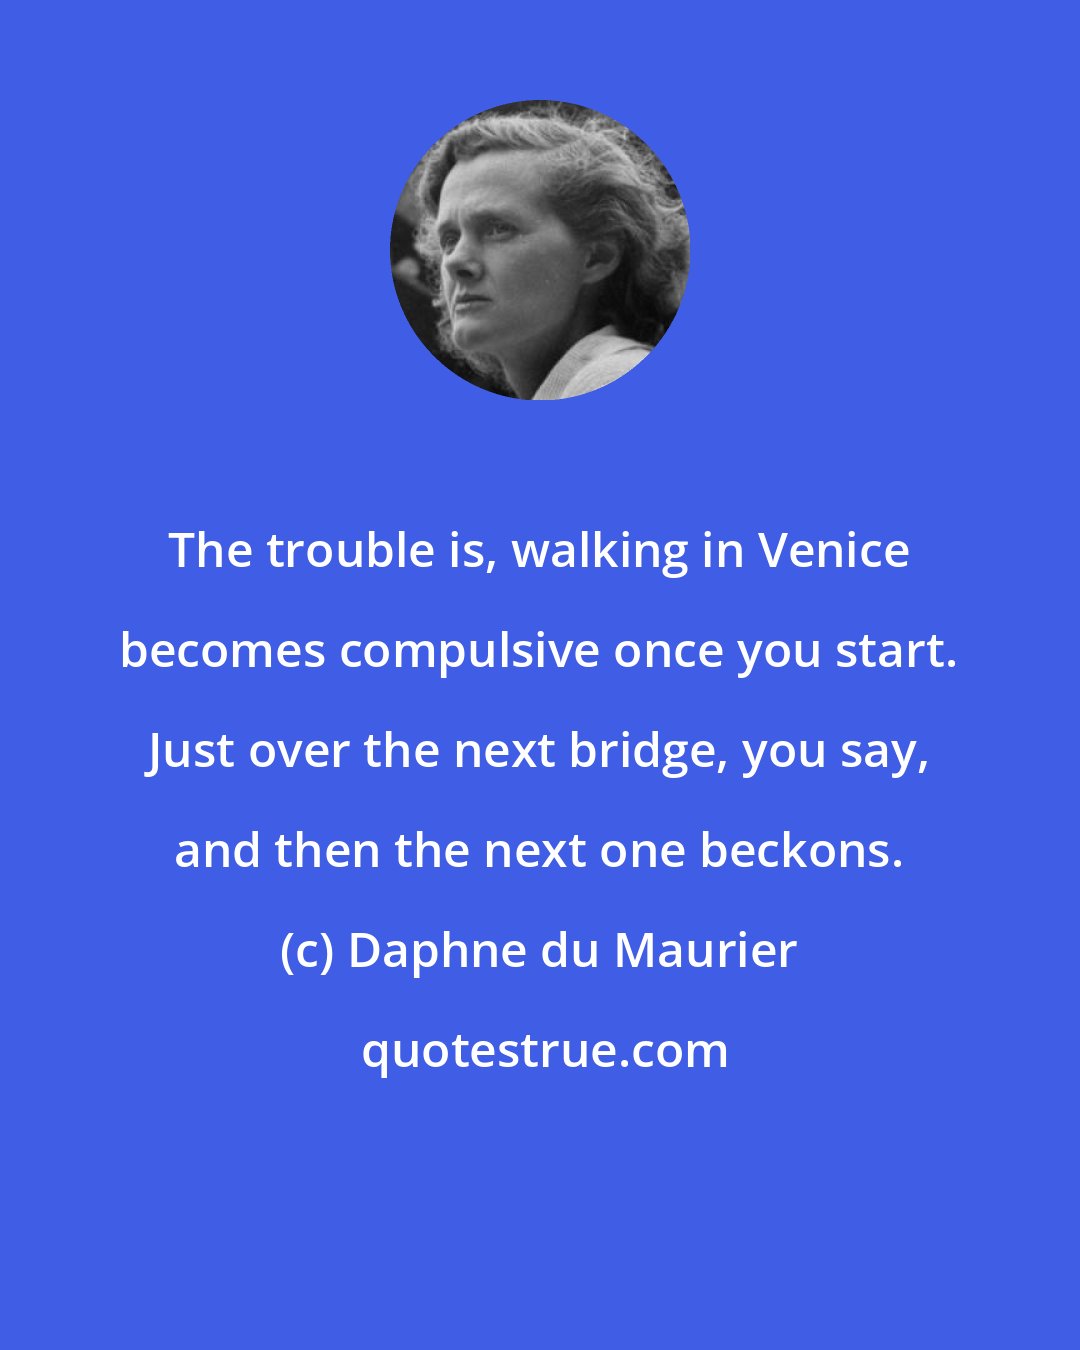 Daphne du Maurier: The trouble is, walking in Venice becomes compulsive once you start. Just over the next bridge, you say, and then the next one beckons.